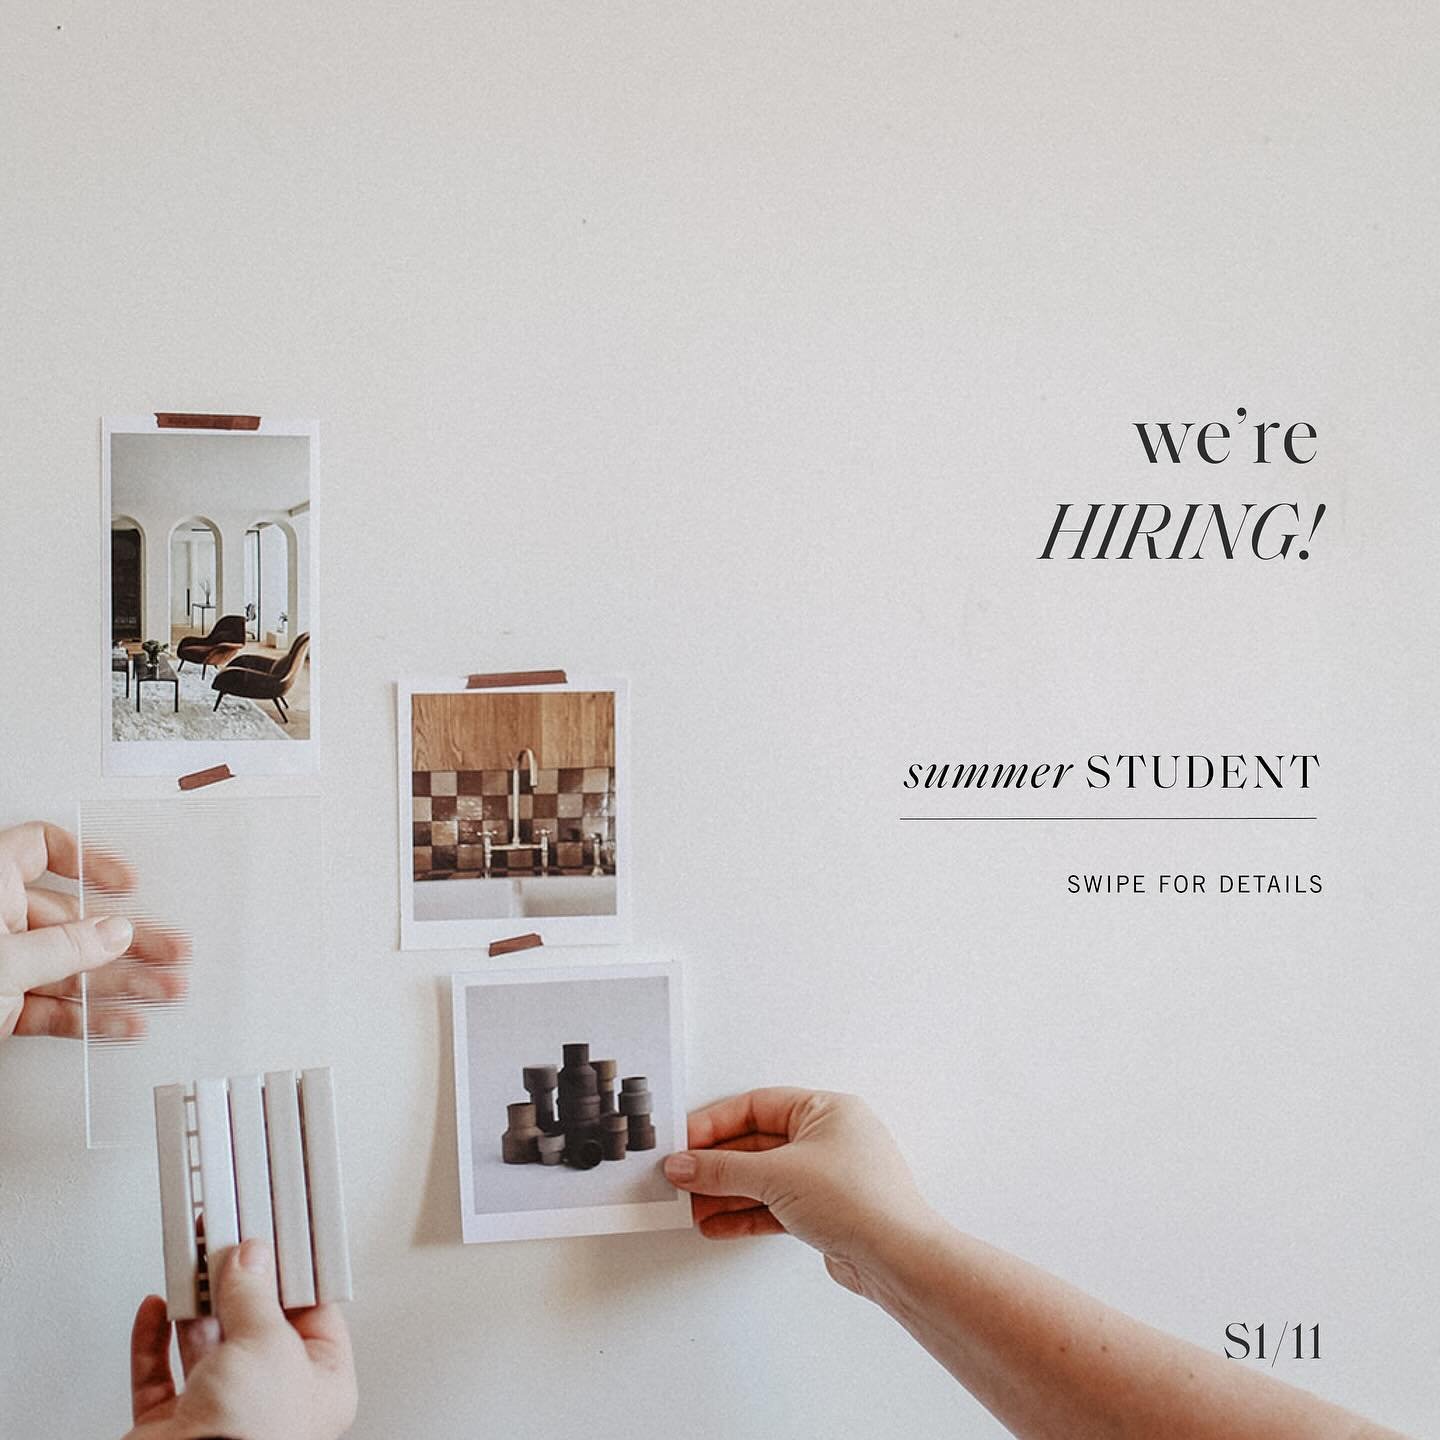 We&rsquo;re hiring!

We&rsquo;re looking for a summer student to join our team and help out with some exciting new projects we have on the boards.

The position is part time and the hours are flexible. 

Must be super AutoCAD savvy, organized &amp; c